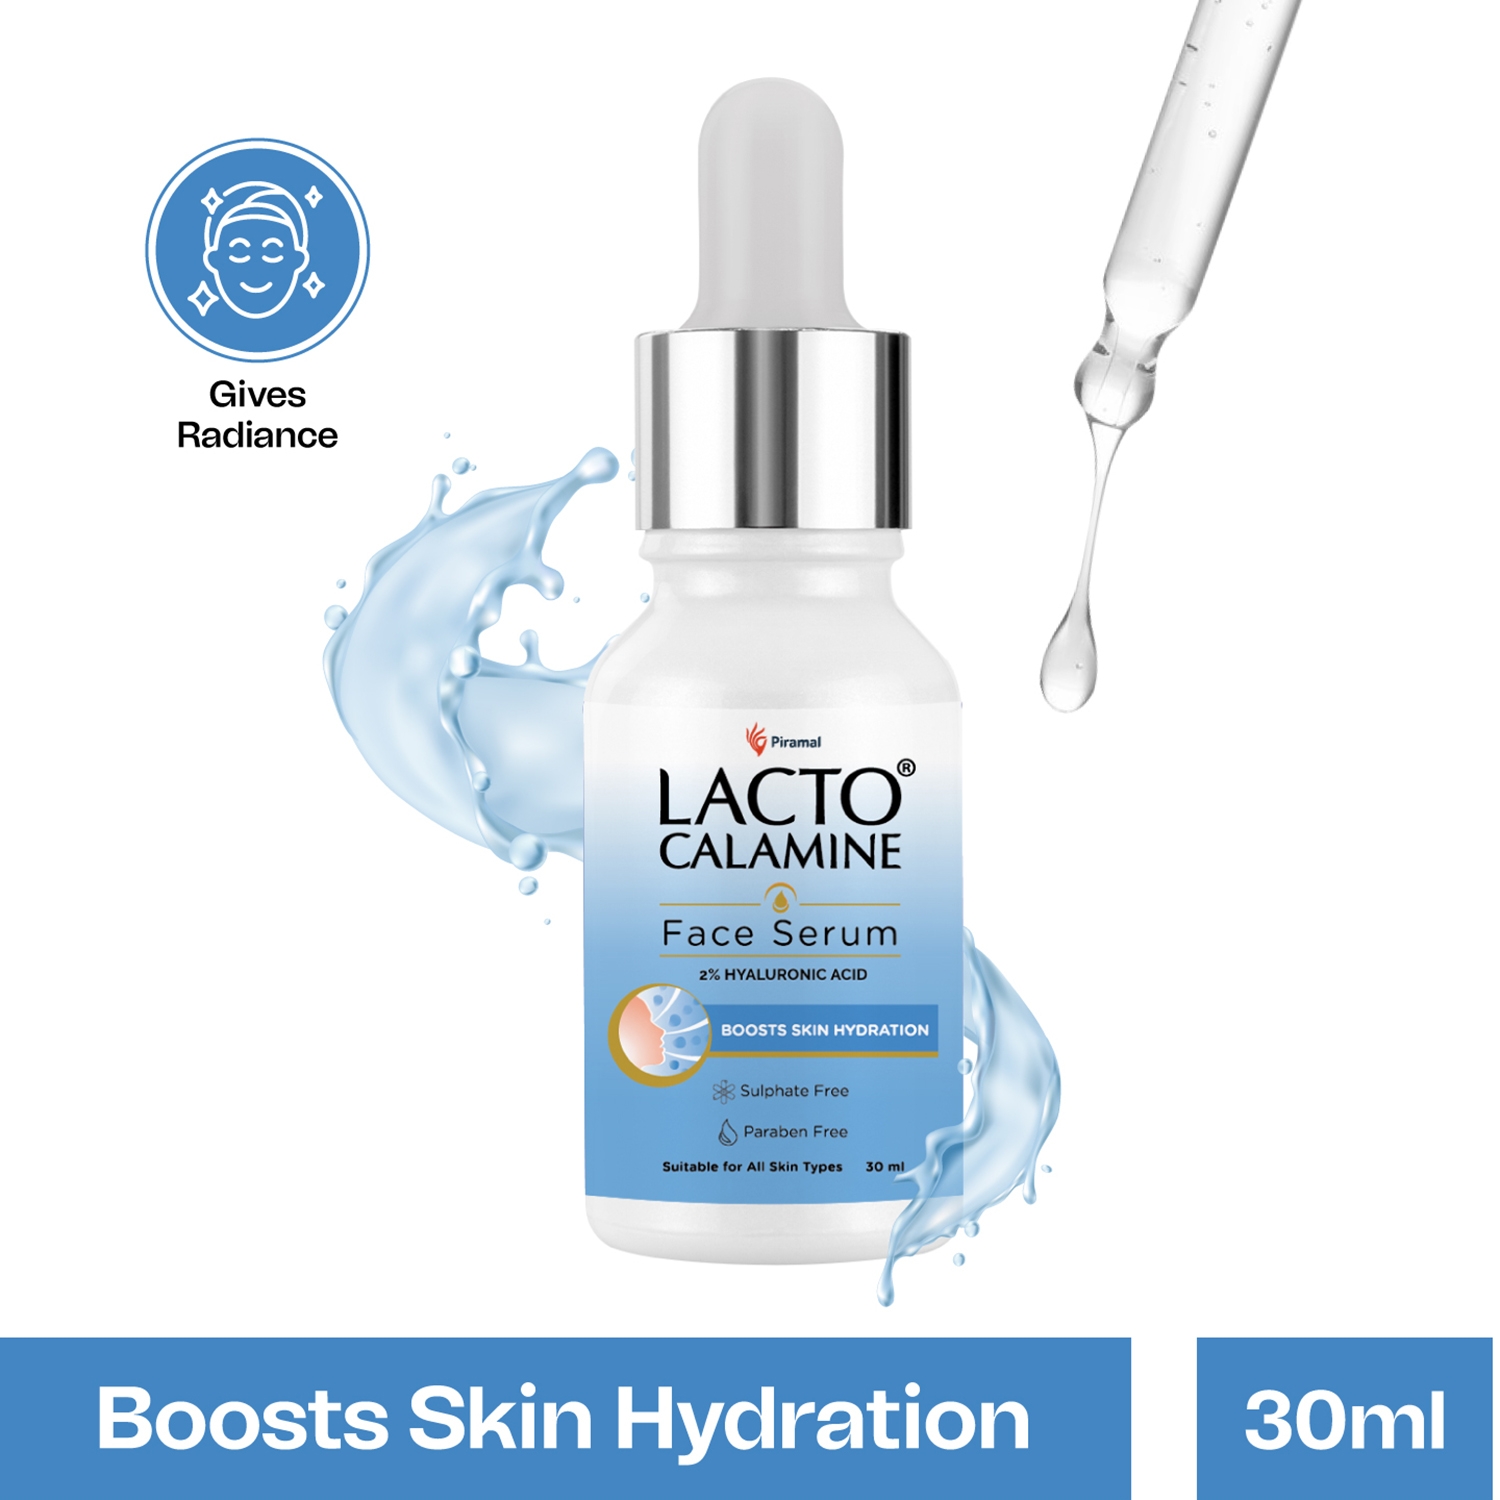 Lacto Calamine | Lacto Calamine 2% Hyaluronic acid face serum with Penta-Ceramide for Plump & Bouncy skin (30ml)